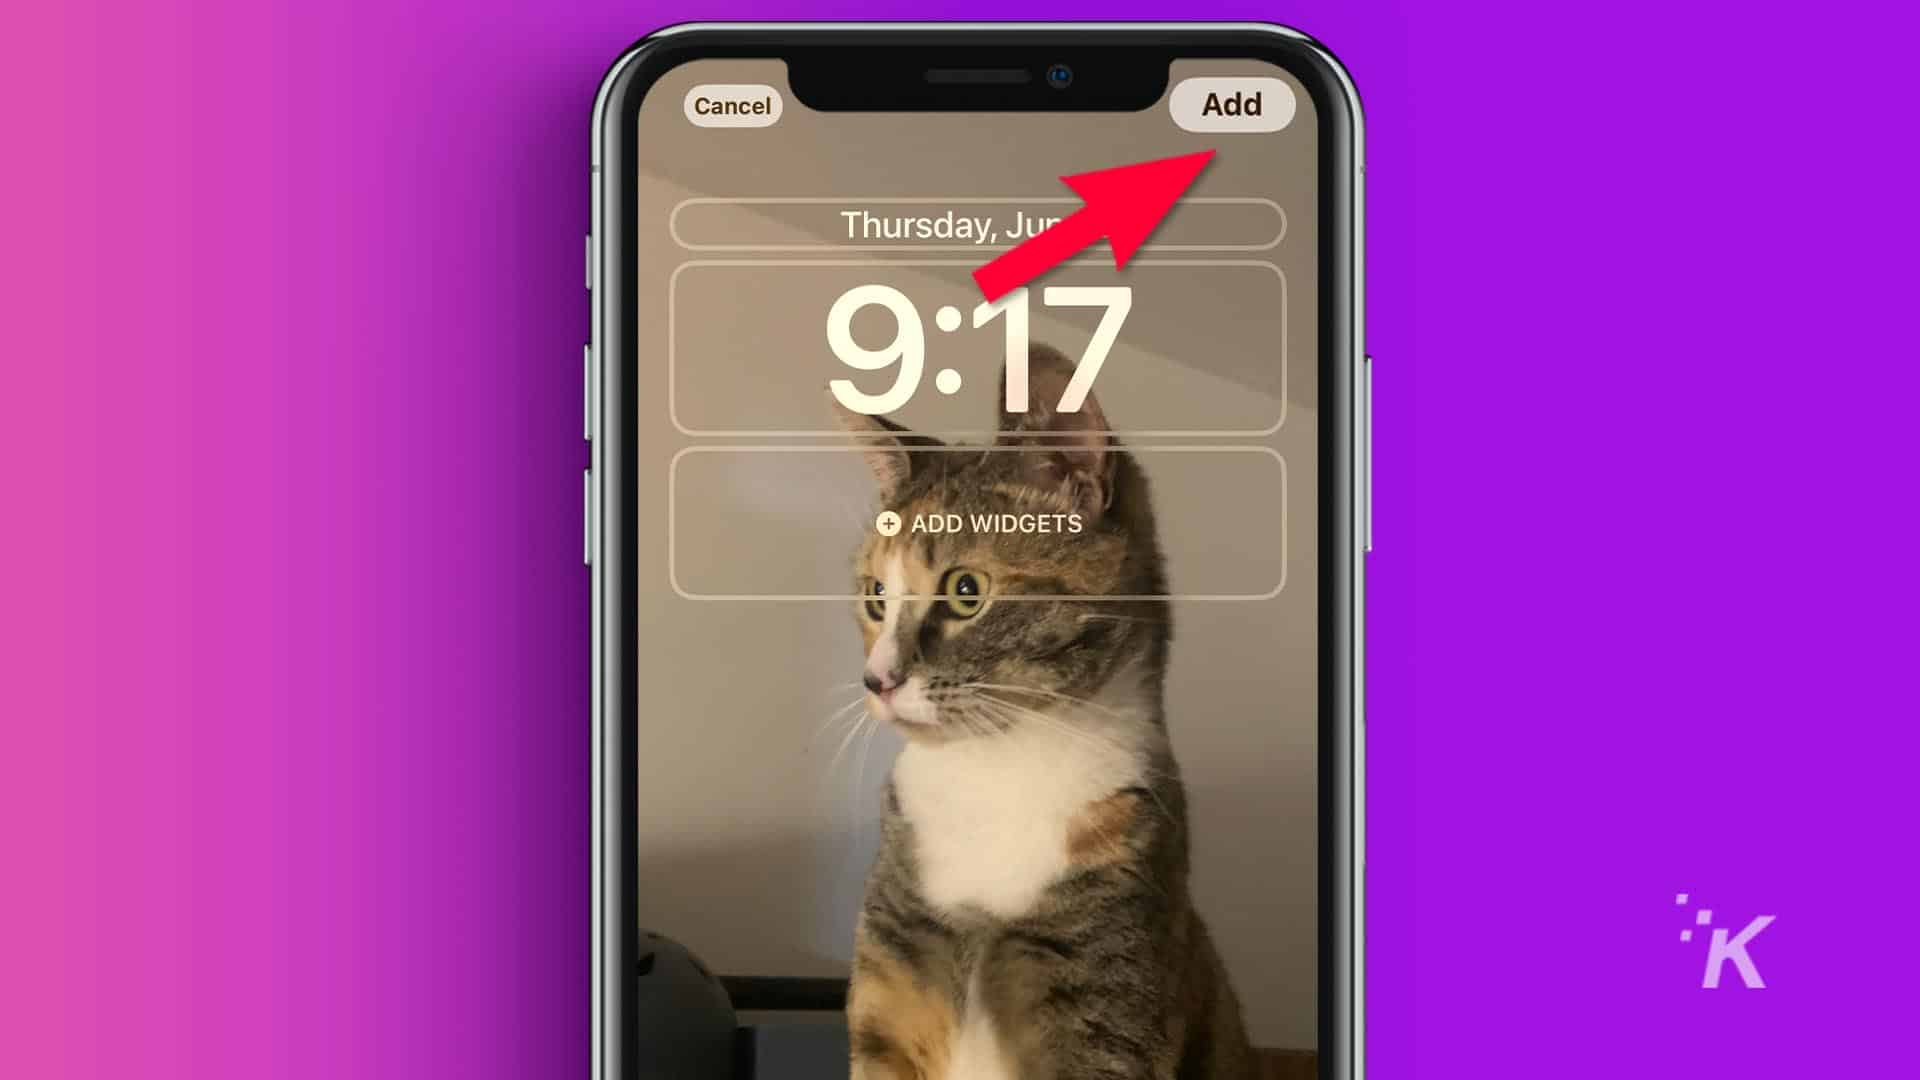 Tap on Add on top right corner on iPhone